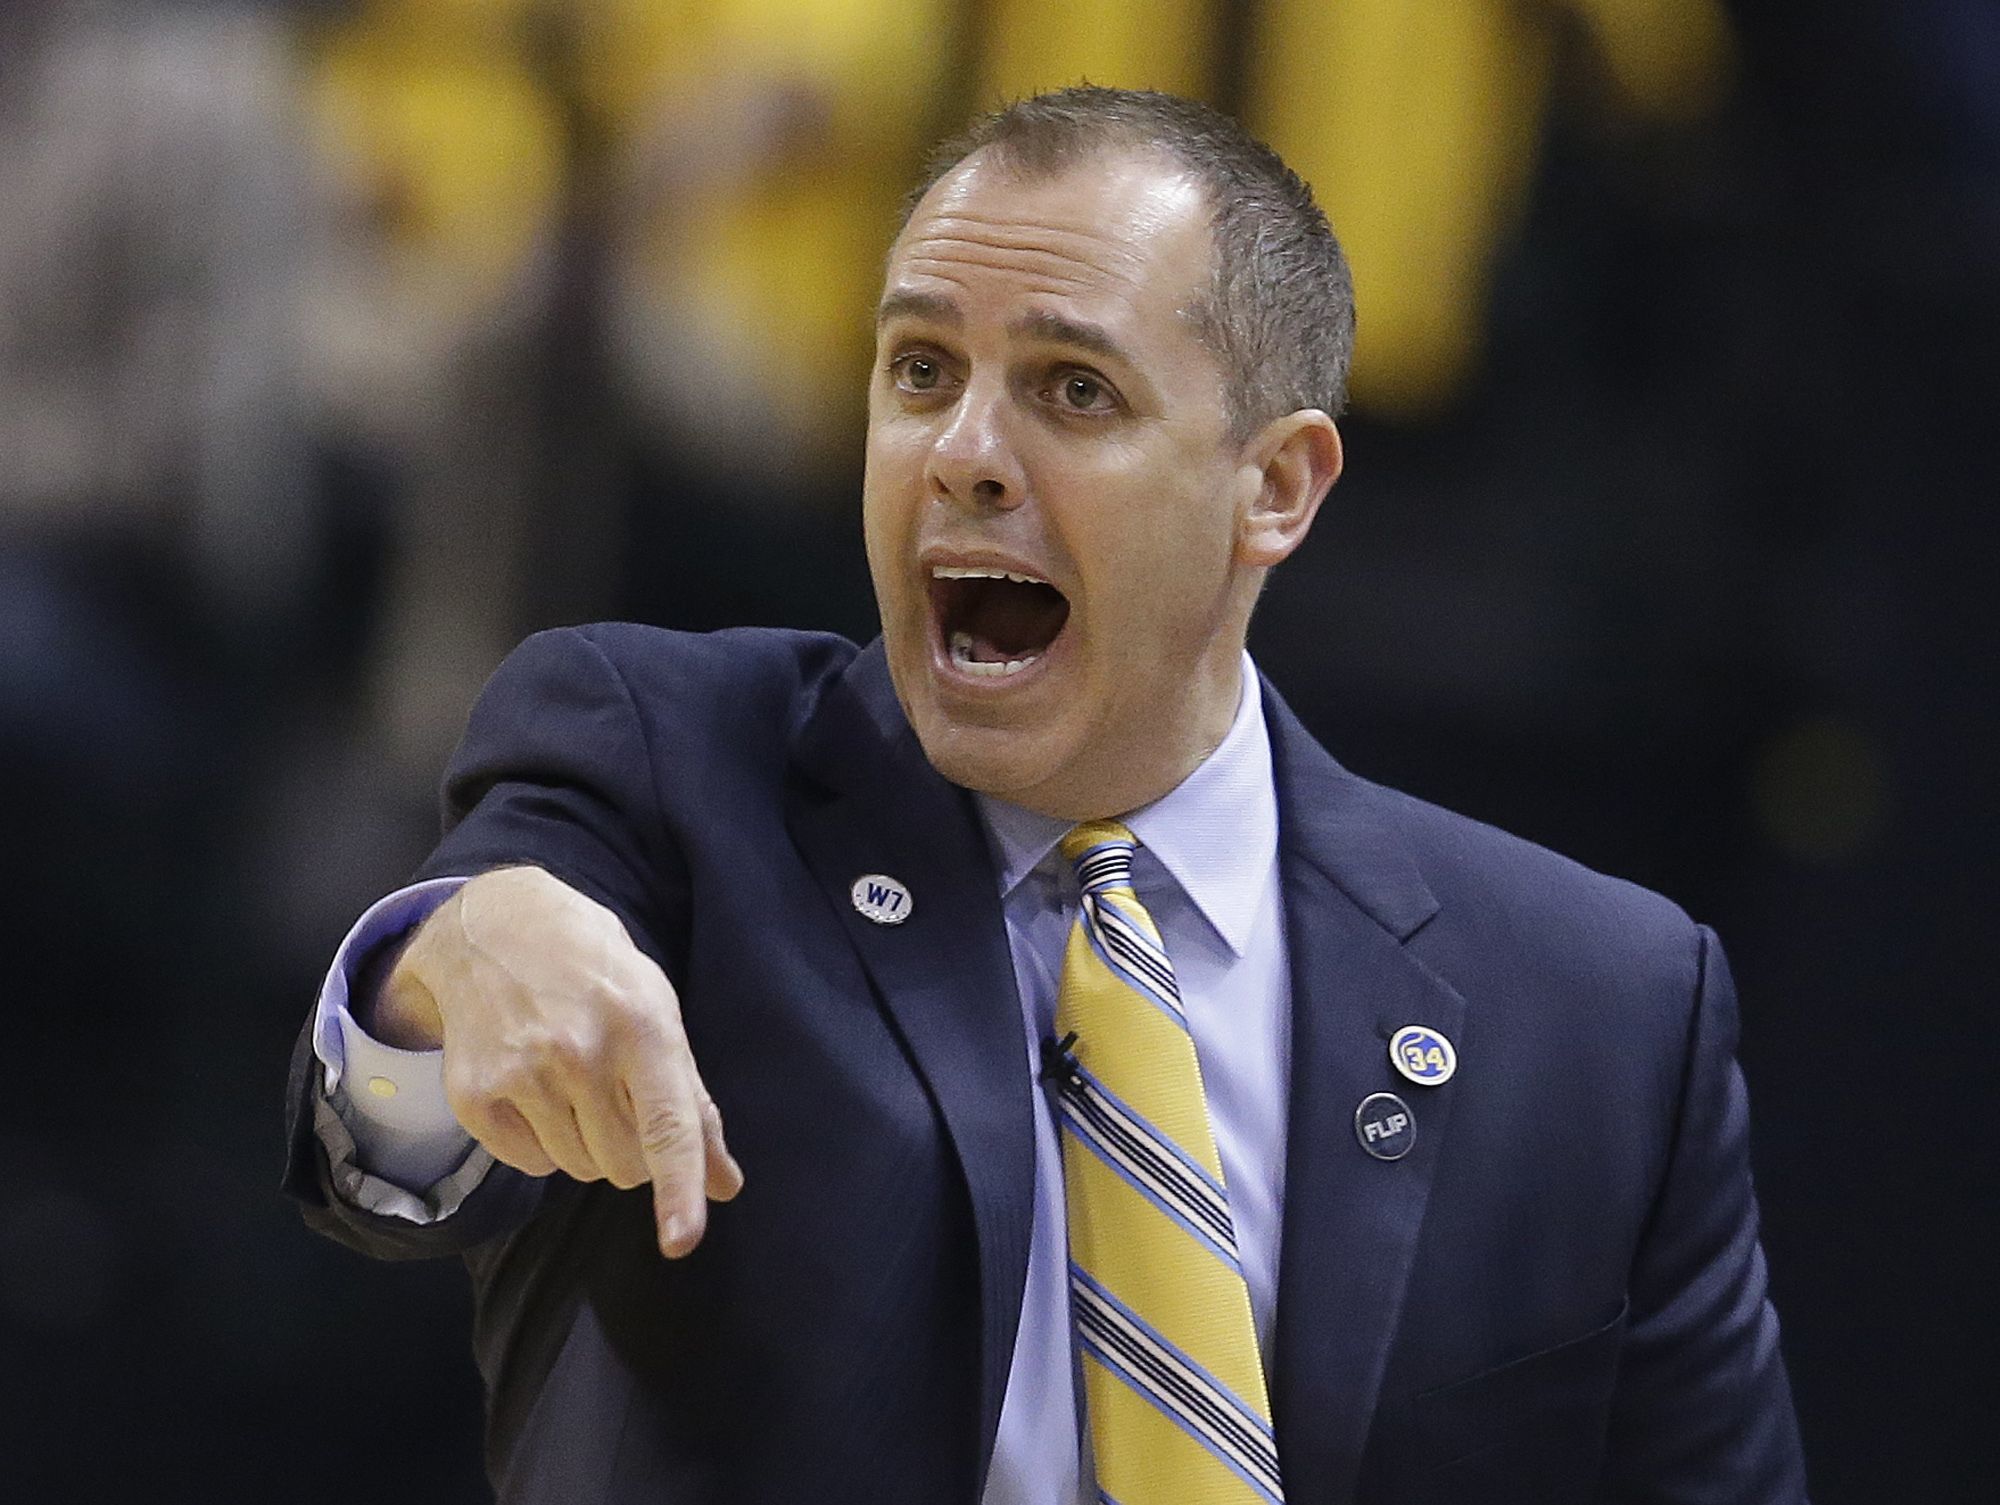 Indiana head coach Frank Vogel shouts instructions during Game 6 of the Pacers’ first-round playoff series against the Toronto Raptors on Friday.